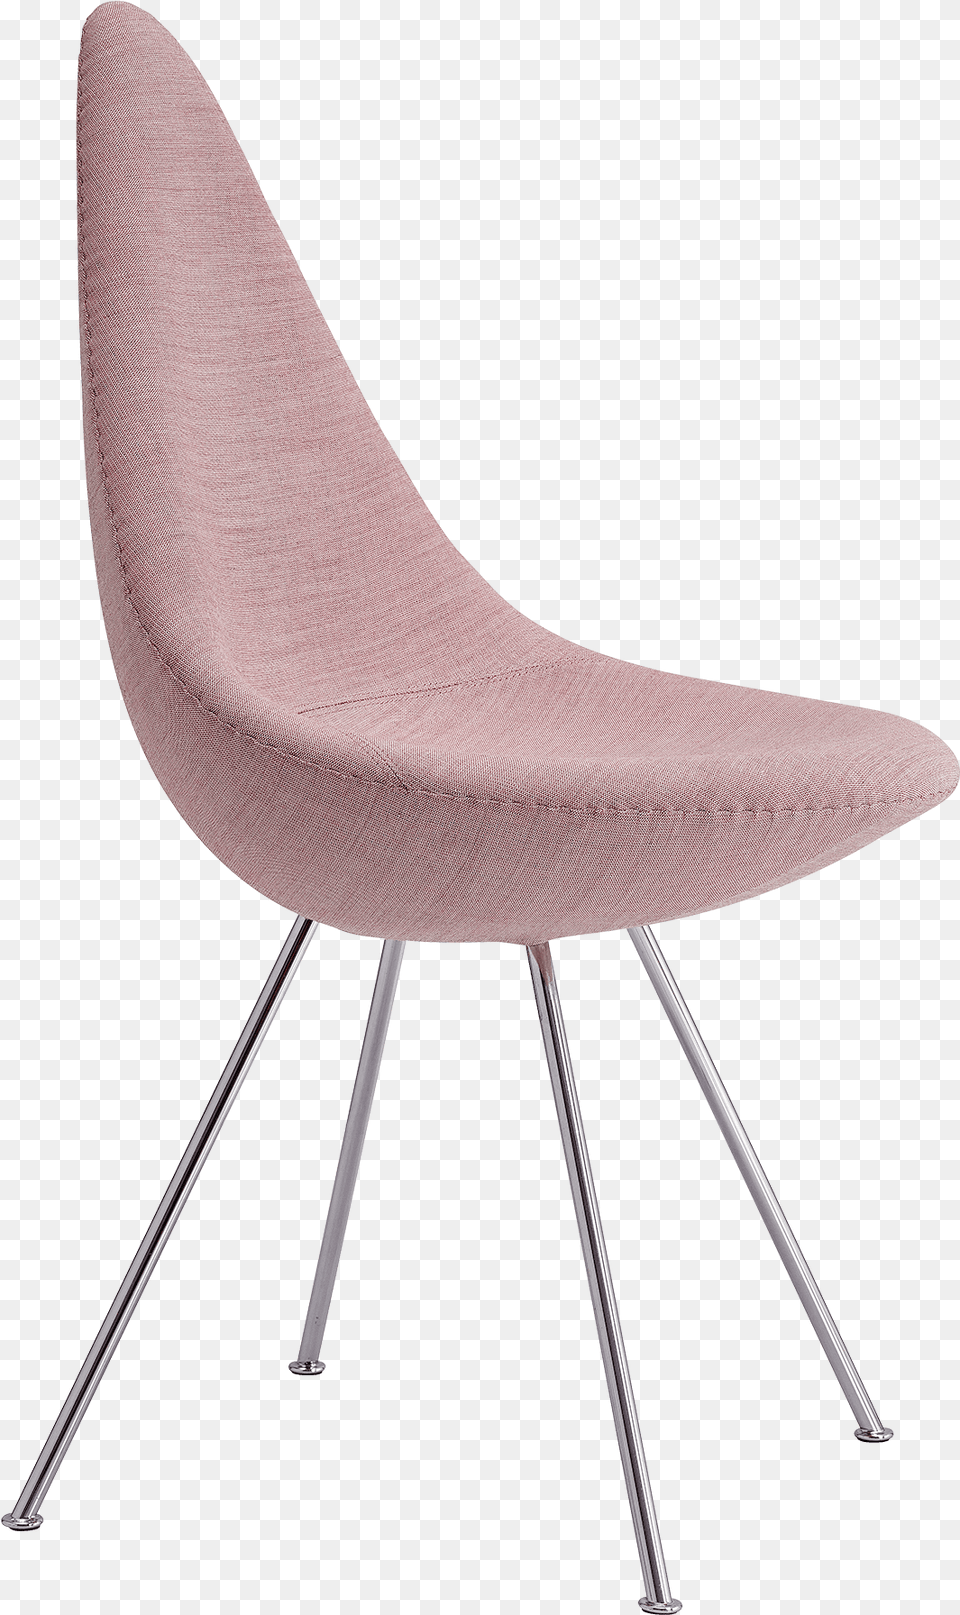 The Drop Chair Arne Jacobsen Upholstered Canvas Rosa Drop Stuhl, Cushion, Furniture, Home Decor, Plywood Png